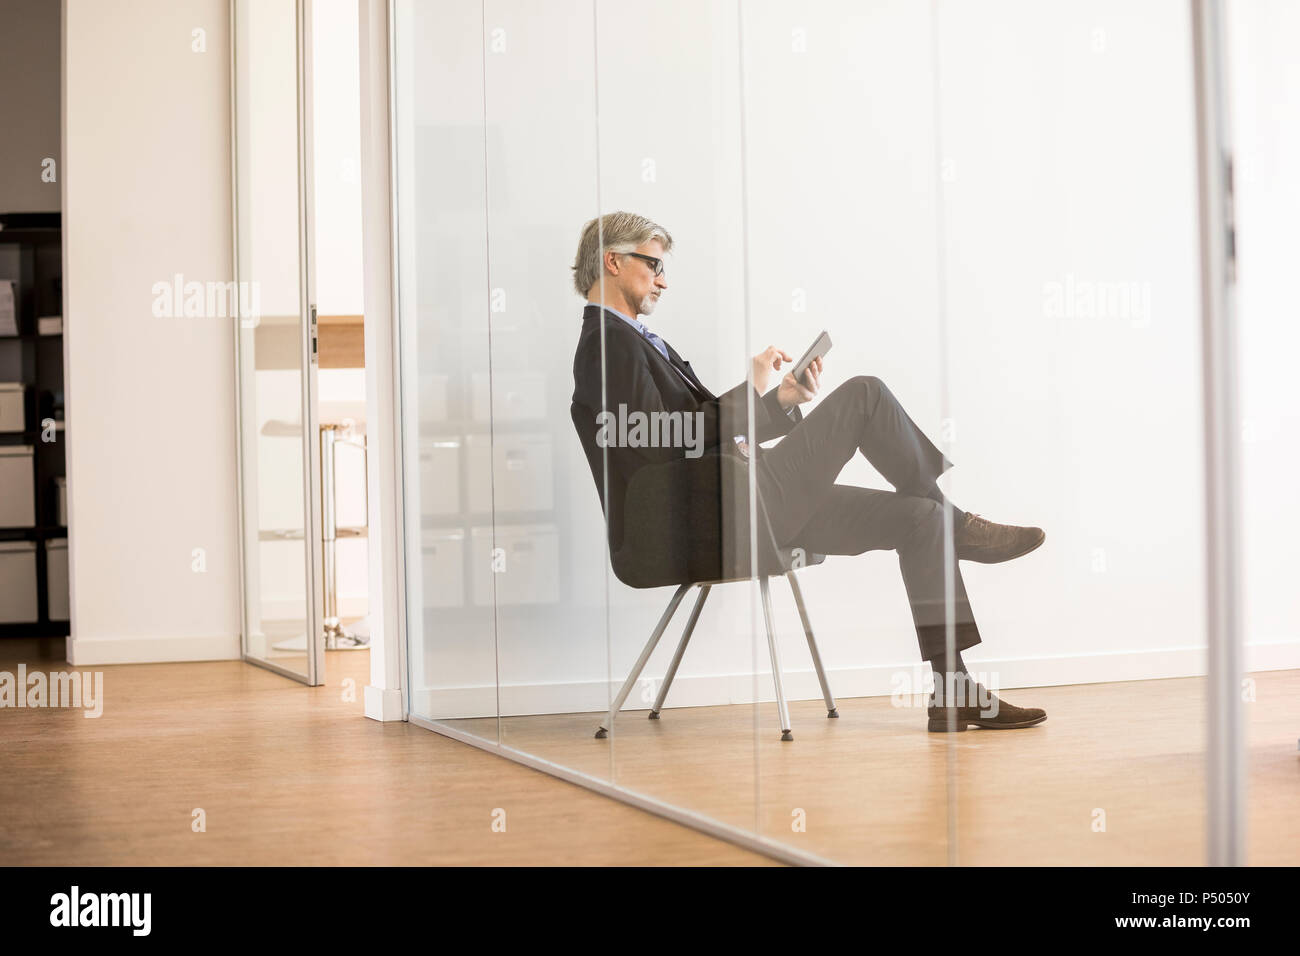 Businessman sitting on chair, using digital tablet Banque D'Images